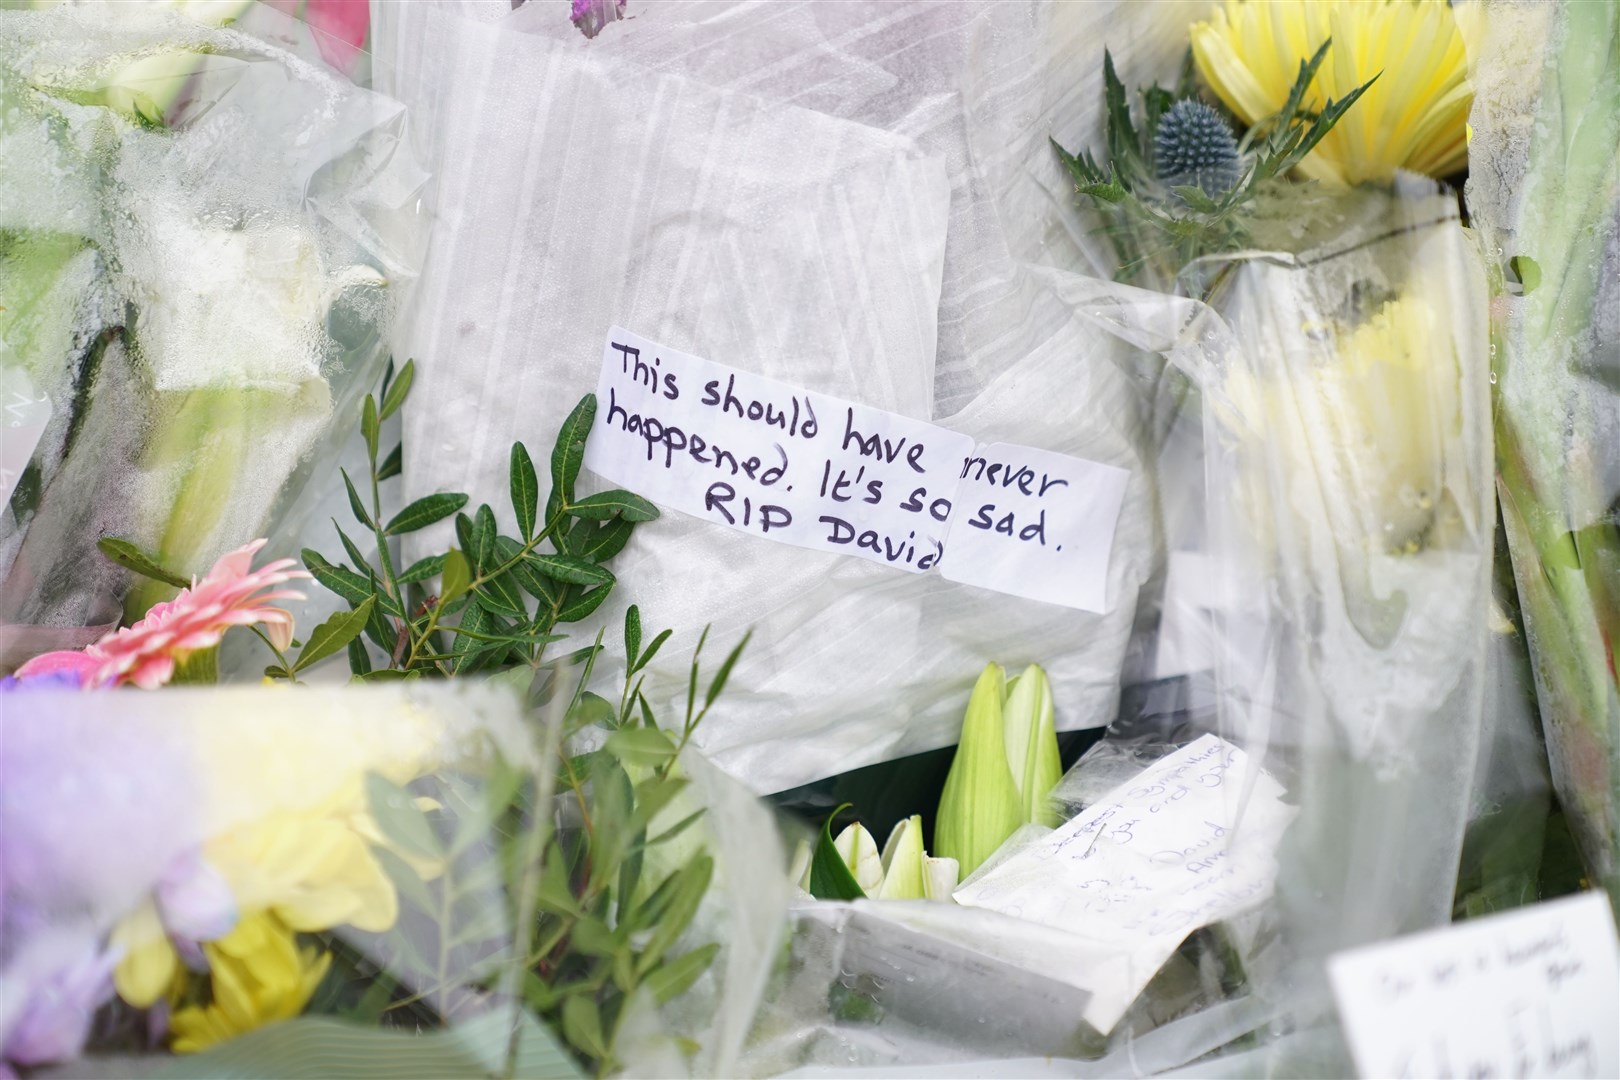 Flowers and tributes at the scene near Belfairs Methodist Church in Leigh-on-Sea (Kirsty O’Connor/PA)